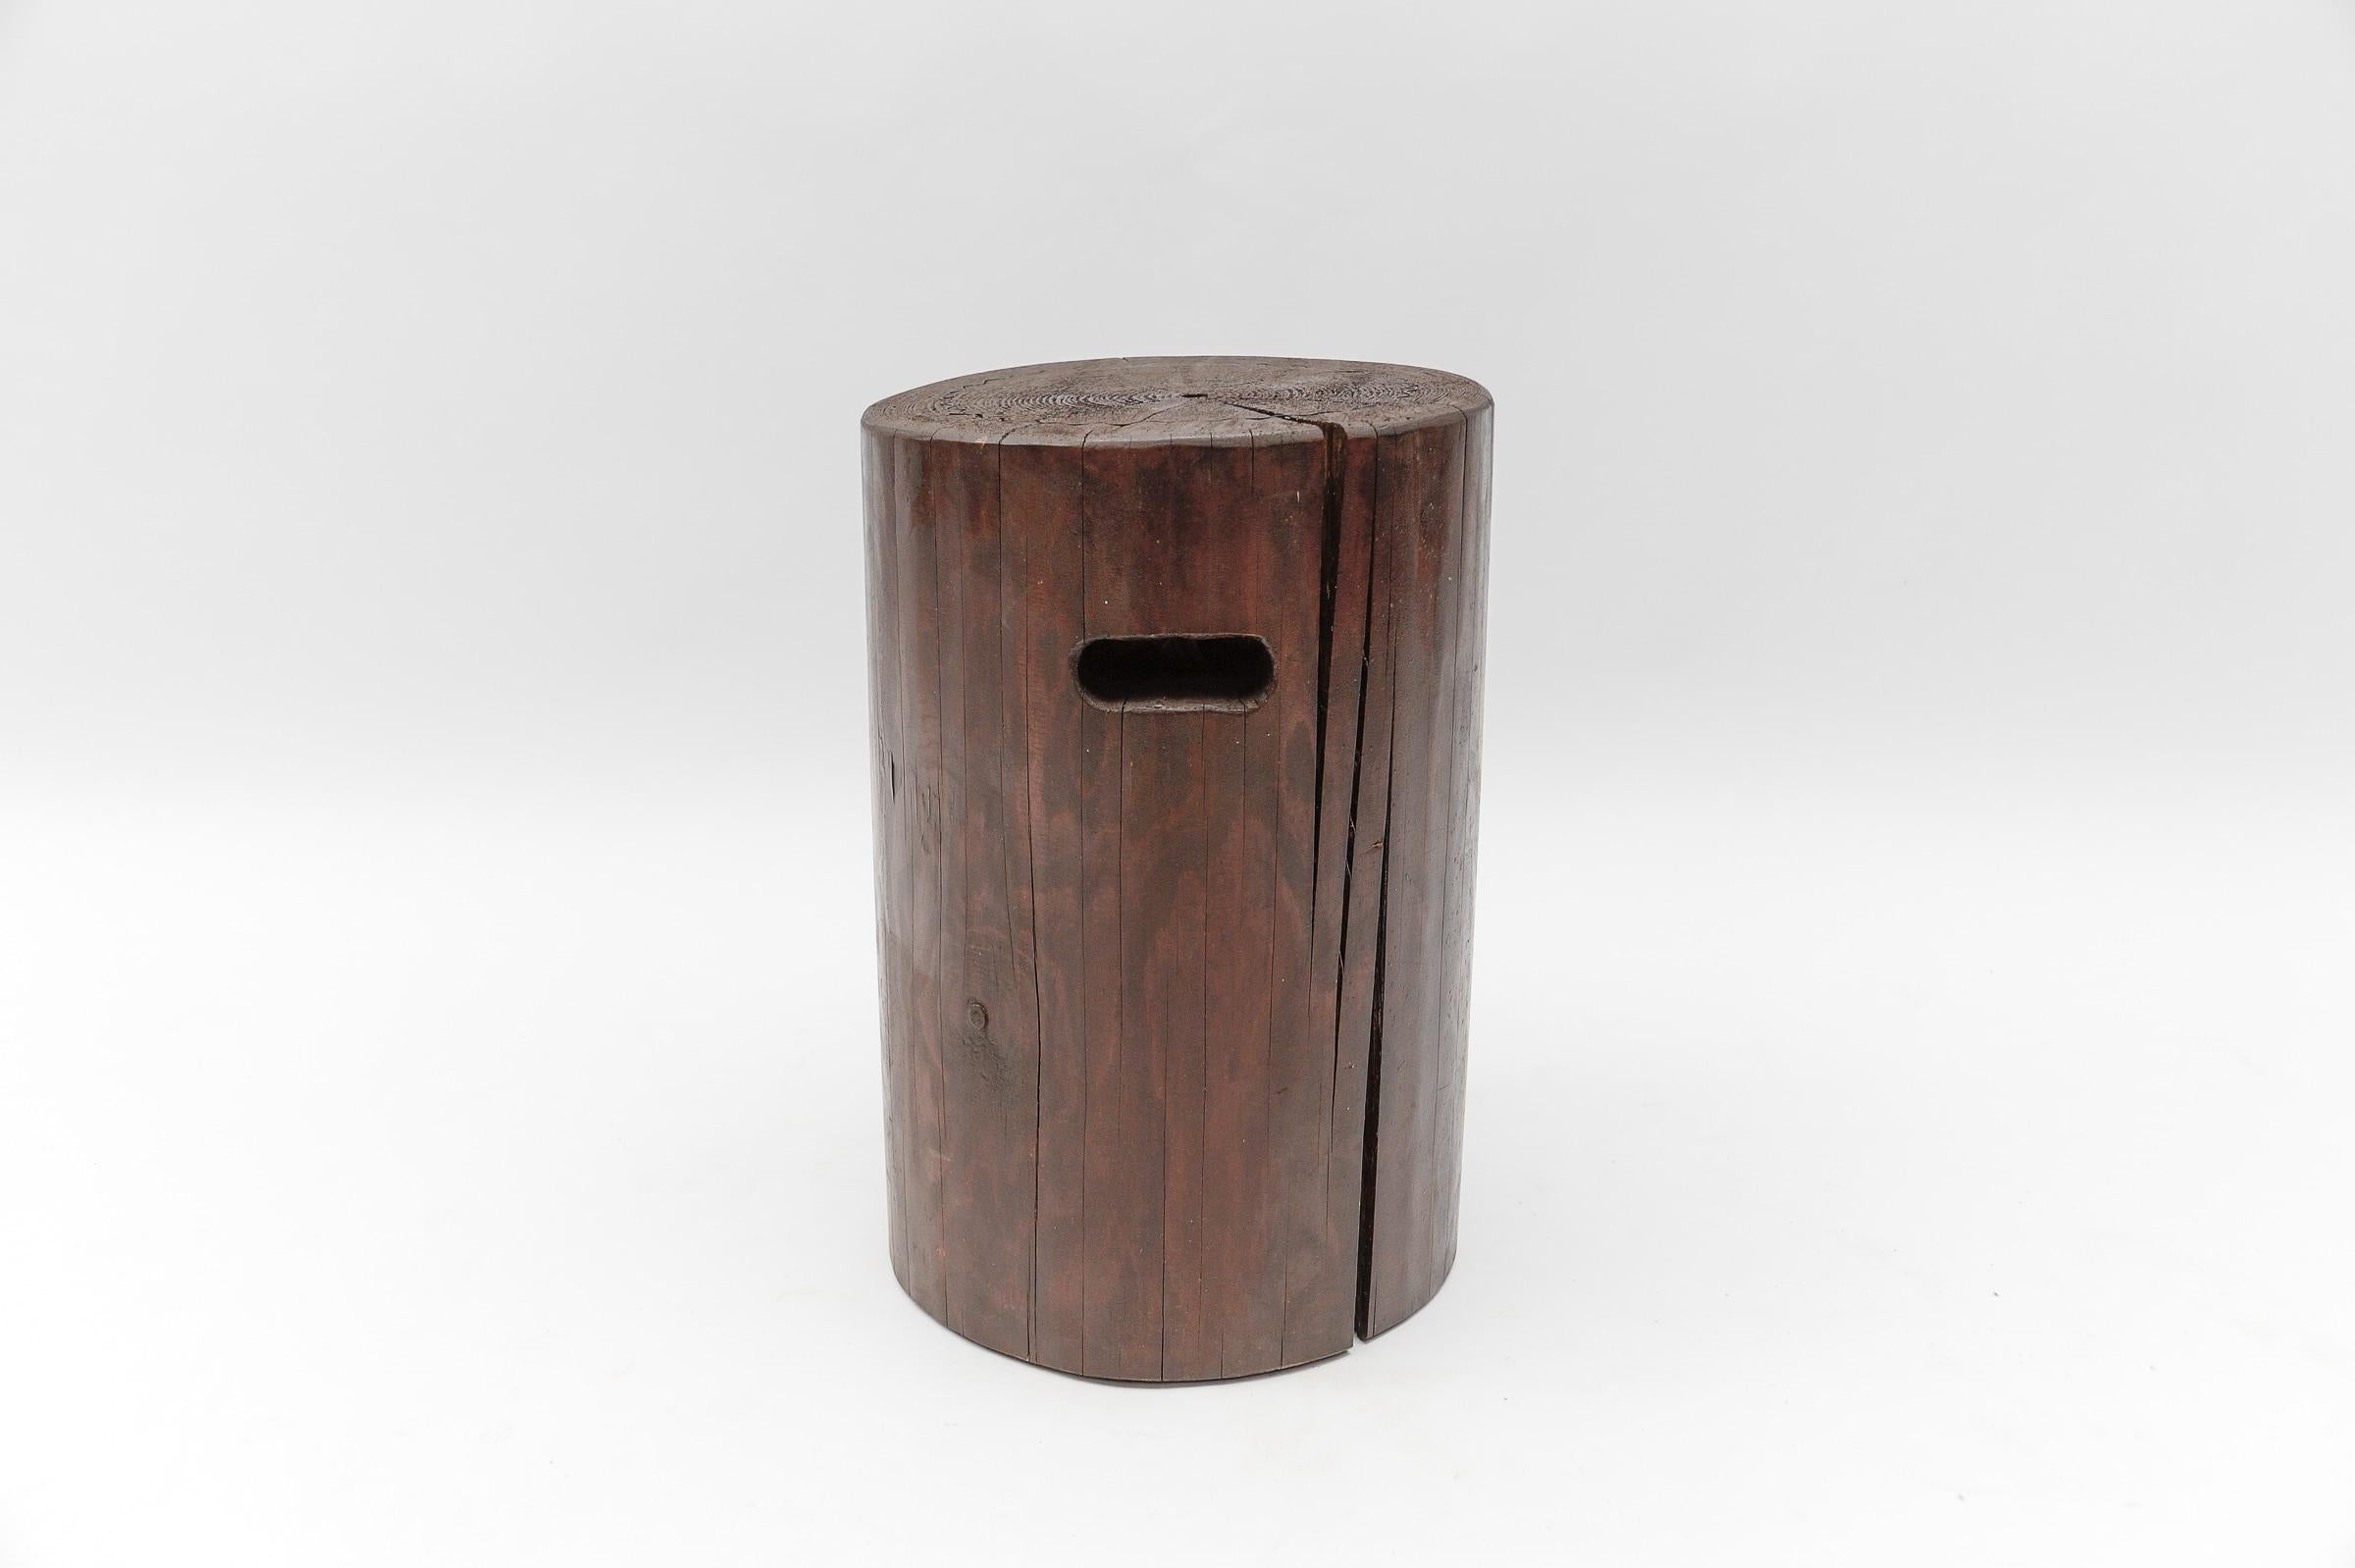 French Provincial Mid-Century Modern Wooden Stool from the French Alps, --- 1950s For Sale